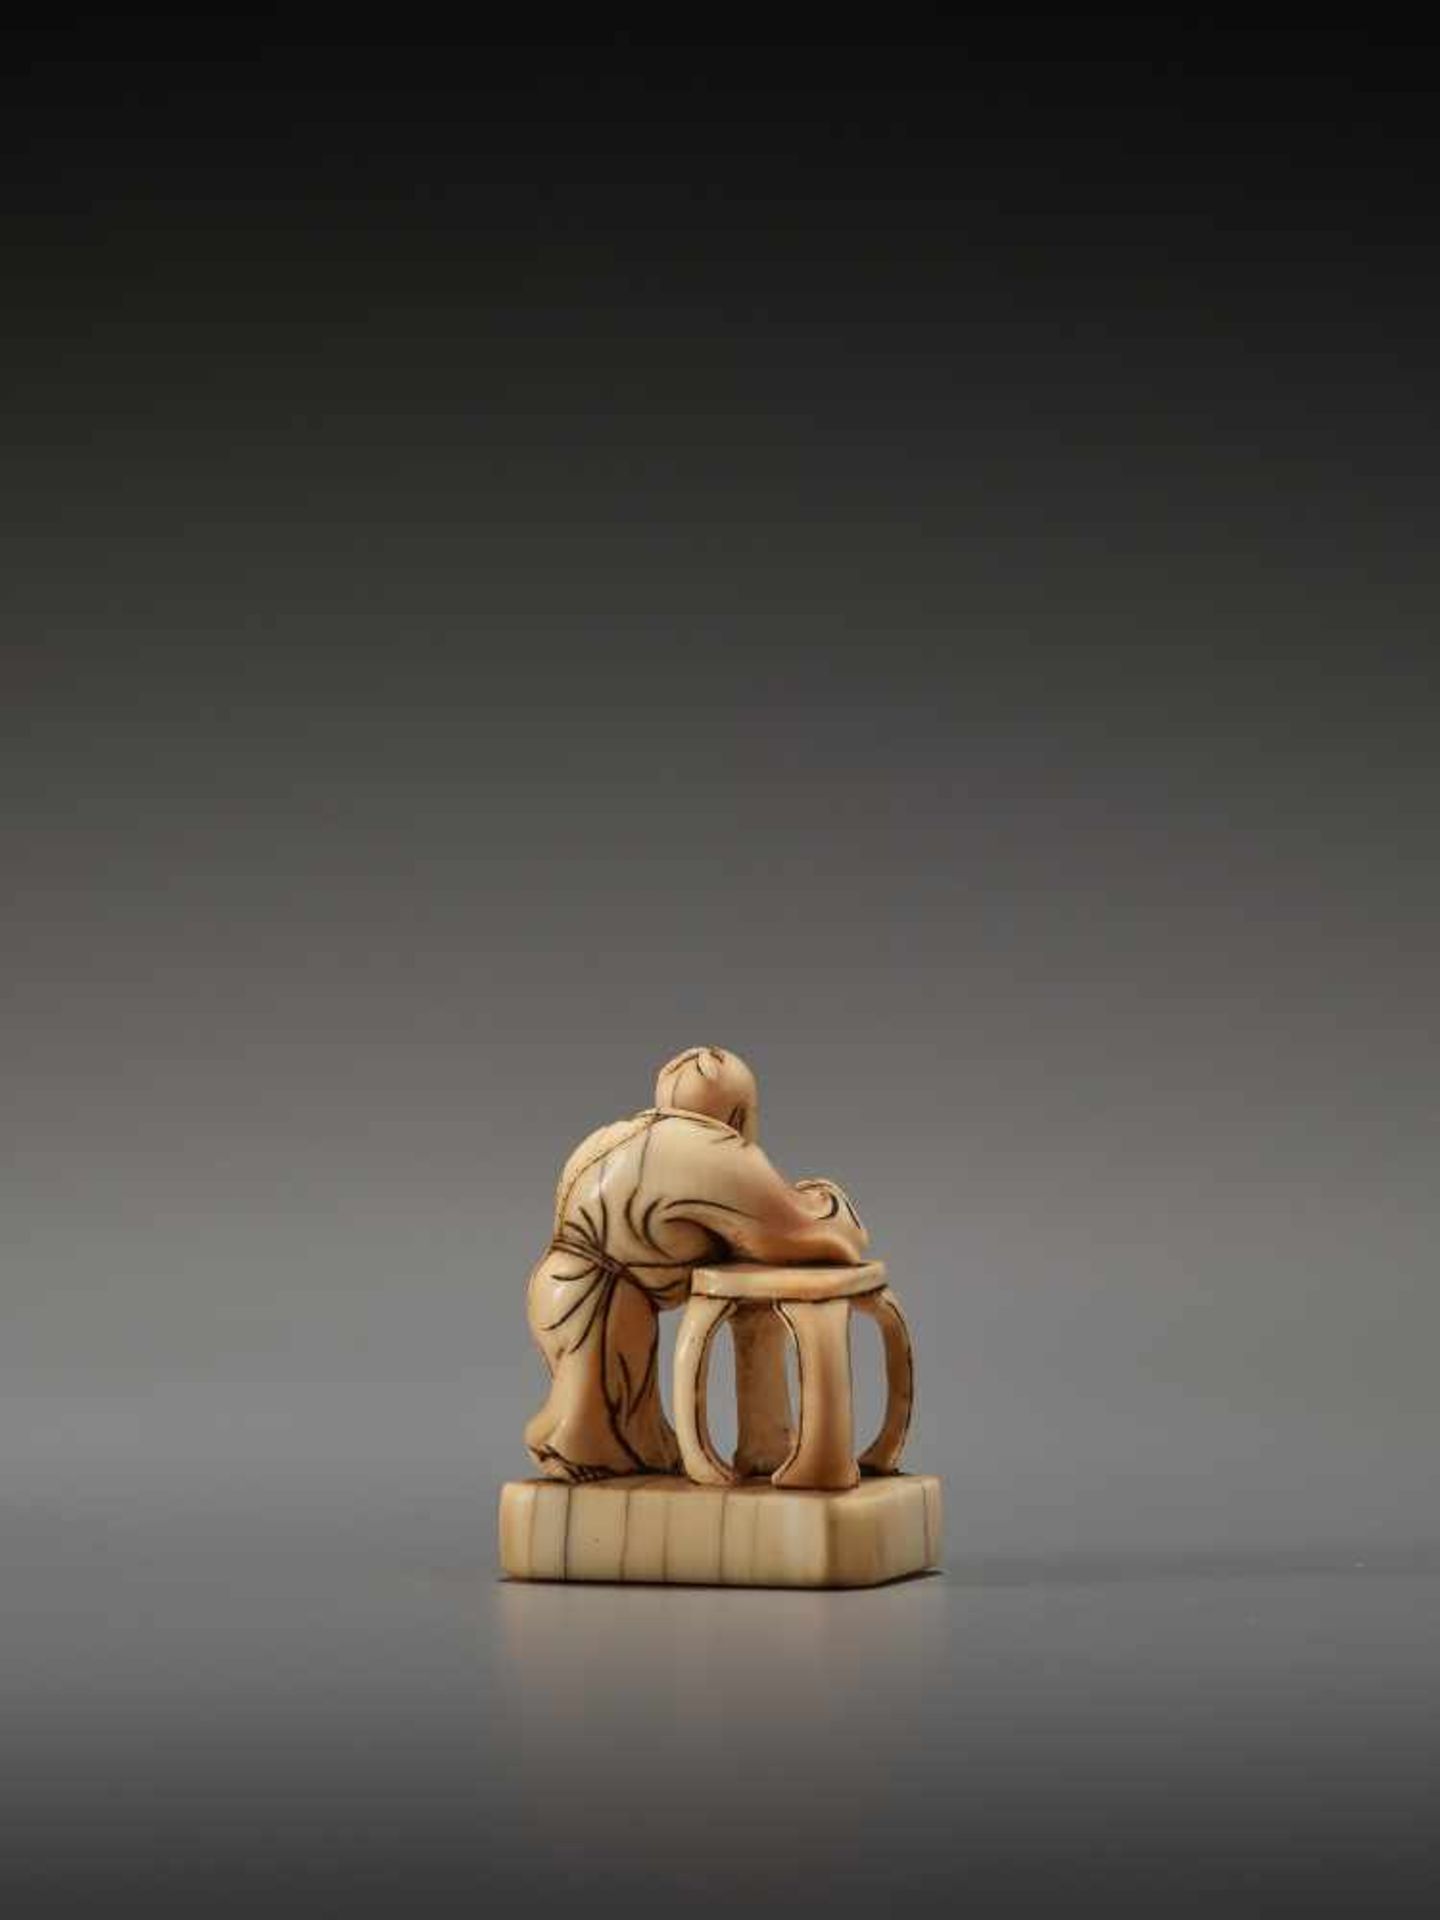 AN EARLY IVORY NETSUKE OF A CHINESE IMMORTAL WITH A FLUTEUnsigned, ivory netsukeJapan, 18th century, - Image 3 of 5